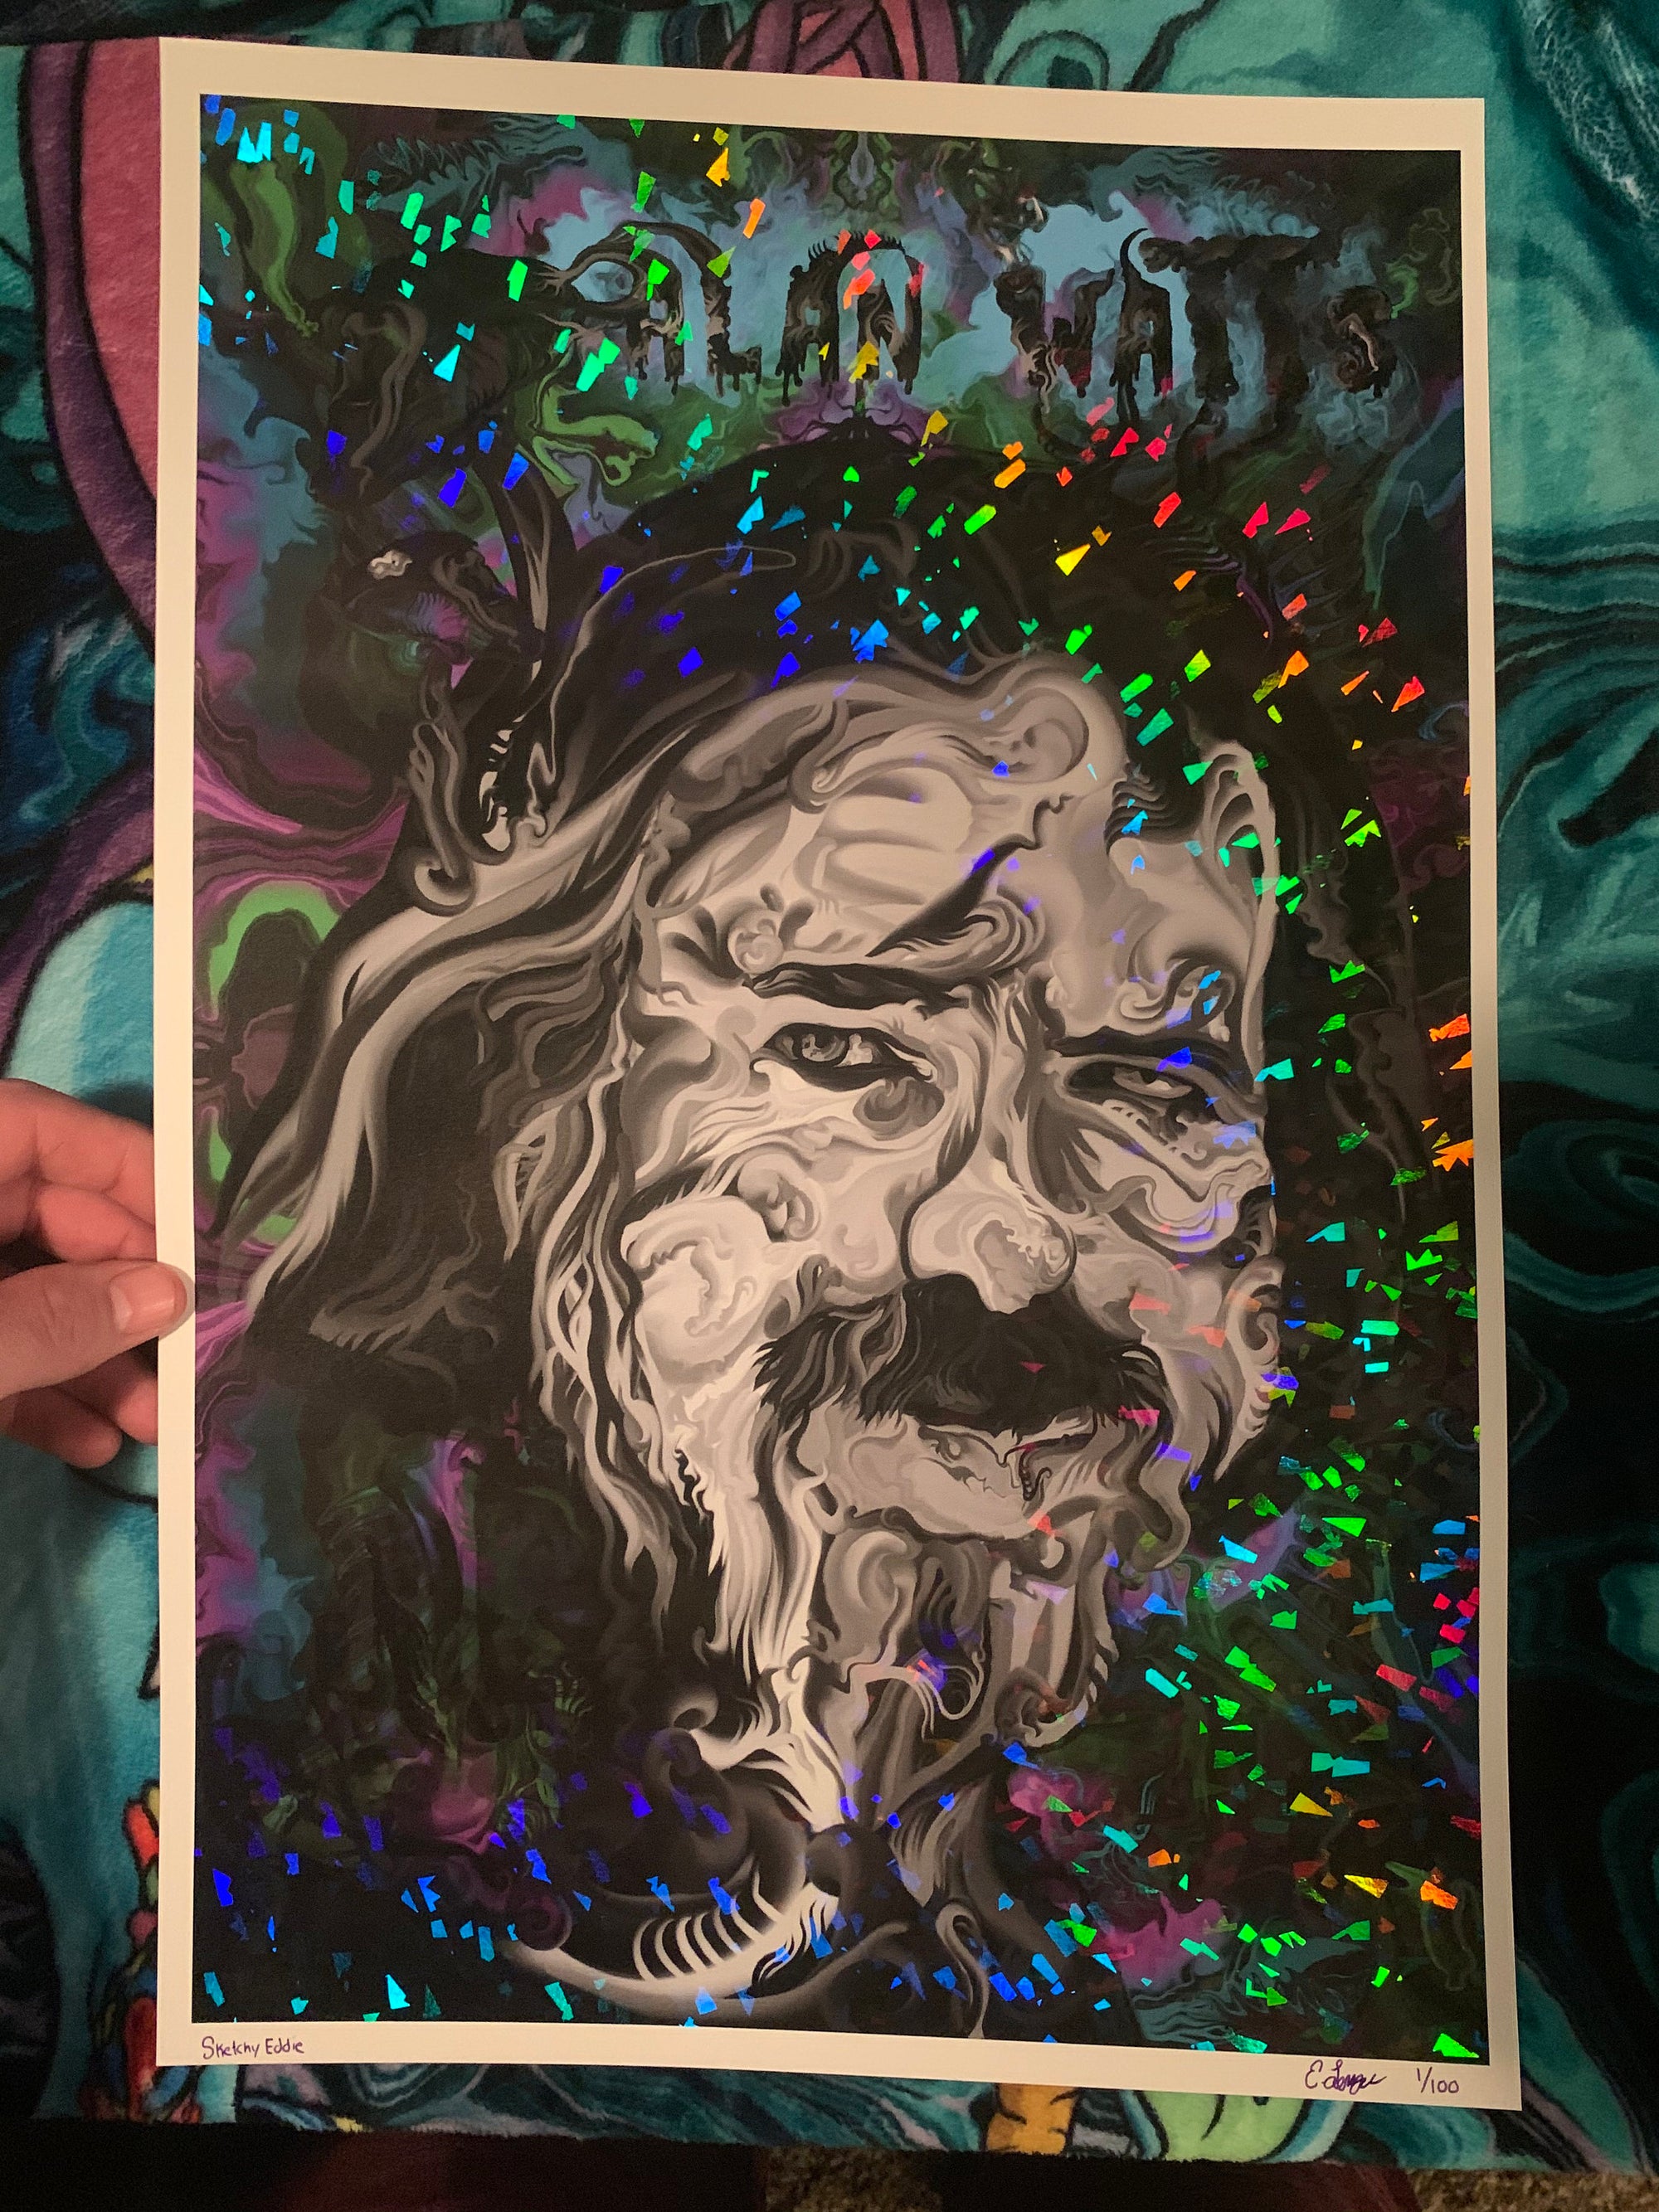 Alan Watts Limited Edition Holographic Print